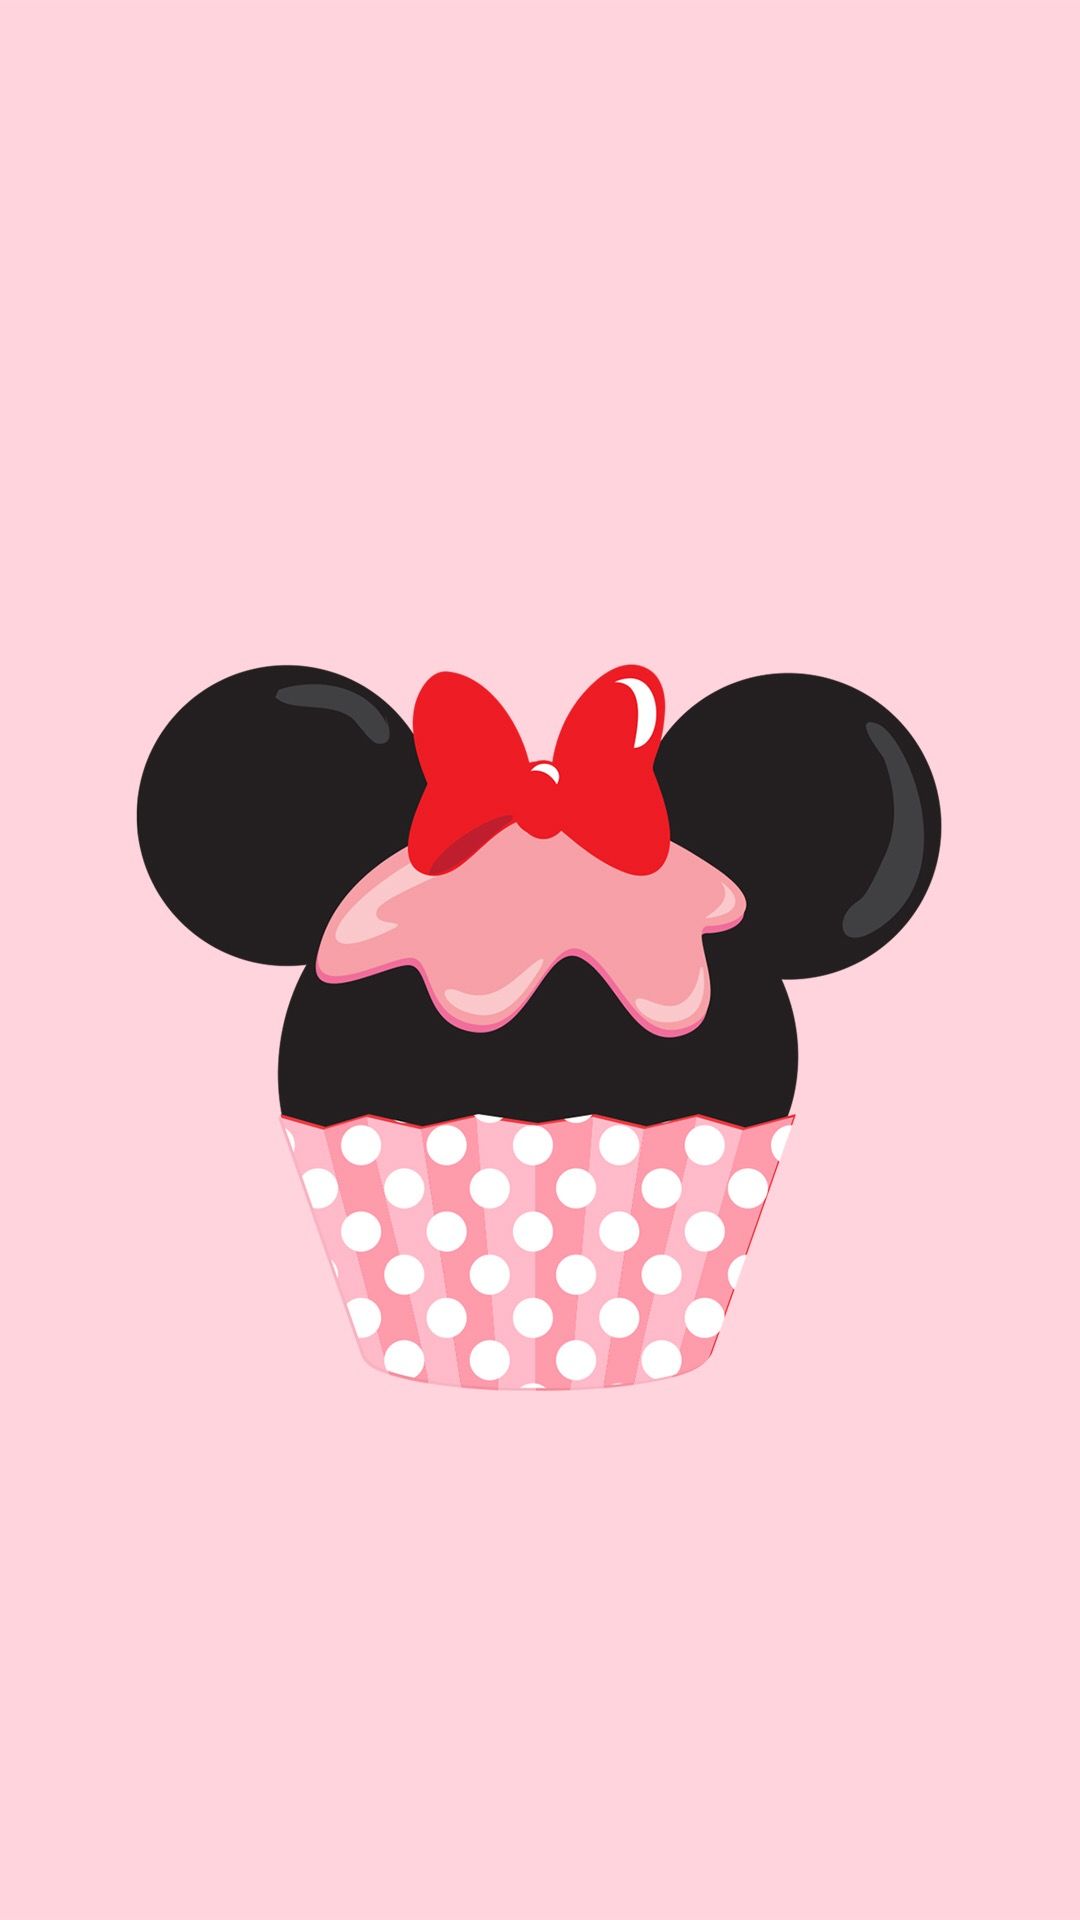 minnie mouse wallpaper für android,rosa,rot,muster,tupfen,design